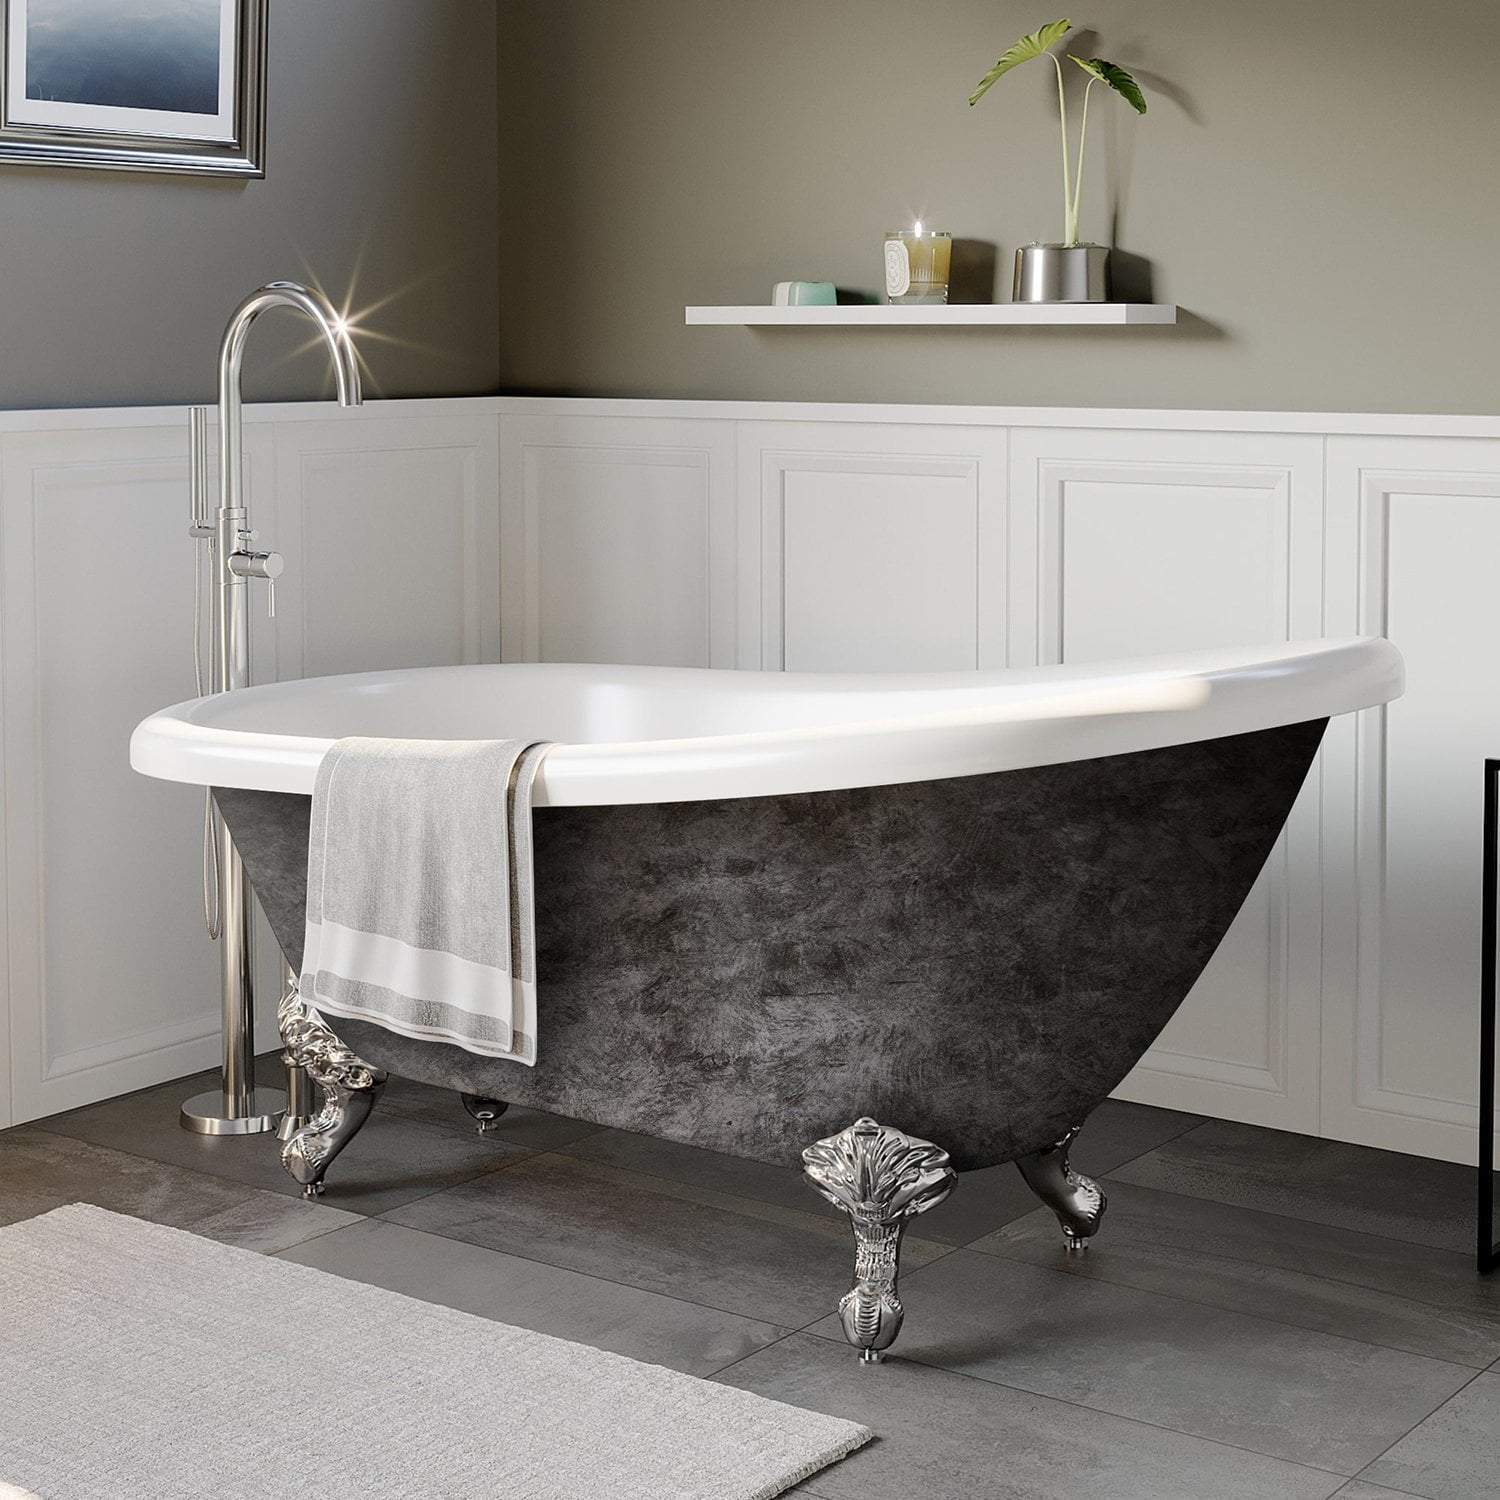 Scorched Platinum 61” x 28” Acrylic Slipper Bathtub with” No Faucet Holes and Polished Chrome Ball and Claw Feet